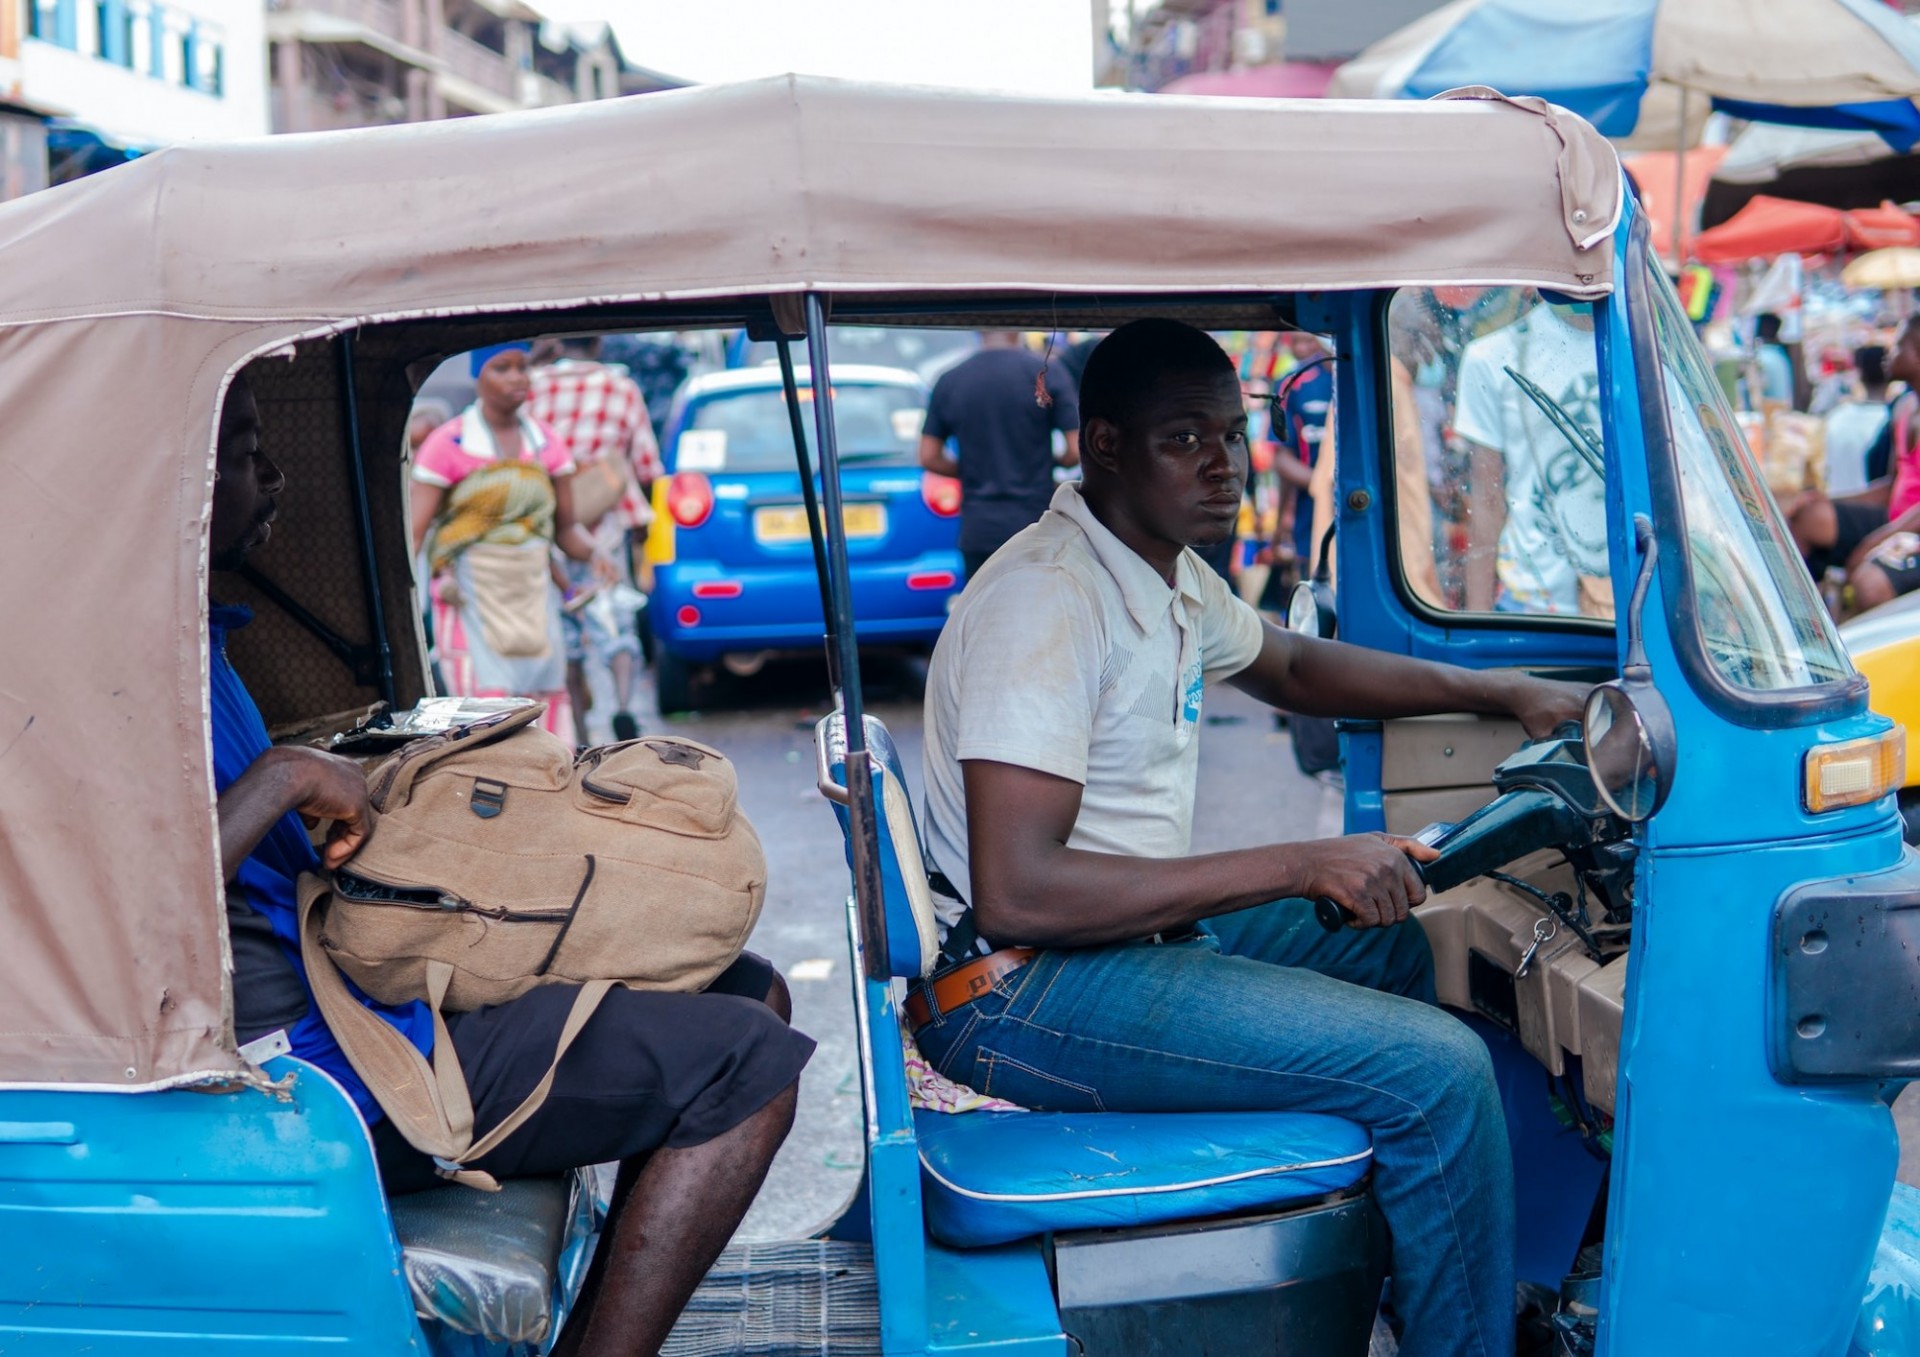 A driver navigates traffic in Kumasi, Ghana. DT4A’s “Beyond Mapping” project focuses on integrating transit data to improve management of the city’s informal transport networks. Photo: Kojo Kwarteng/Unsplash